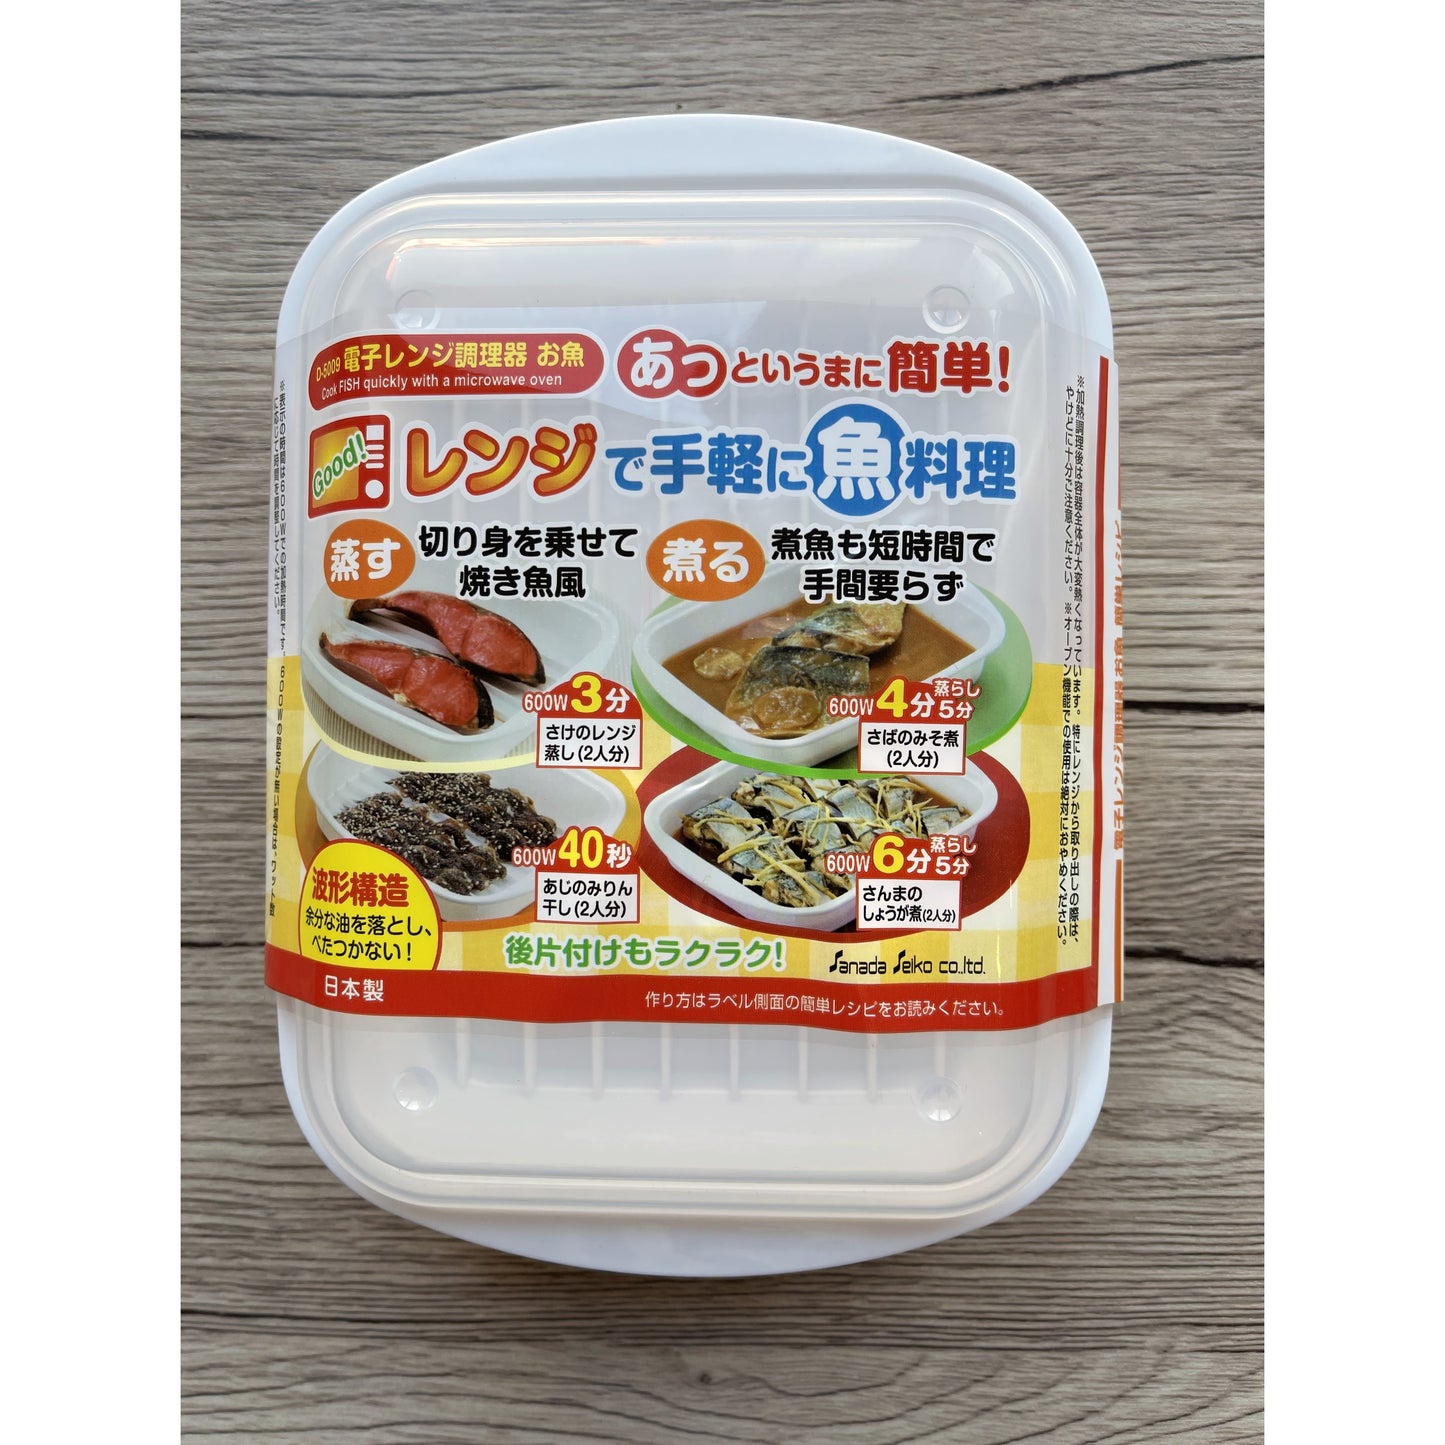 Microwave Container 21.5 x 15.5 x 6 cm (Made in Japan)